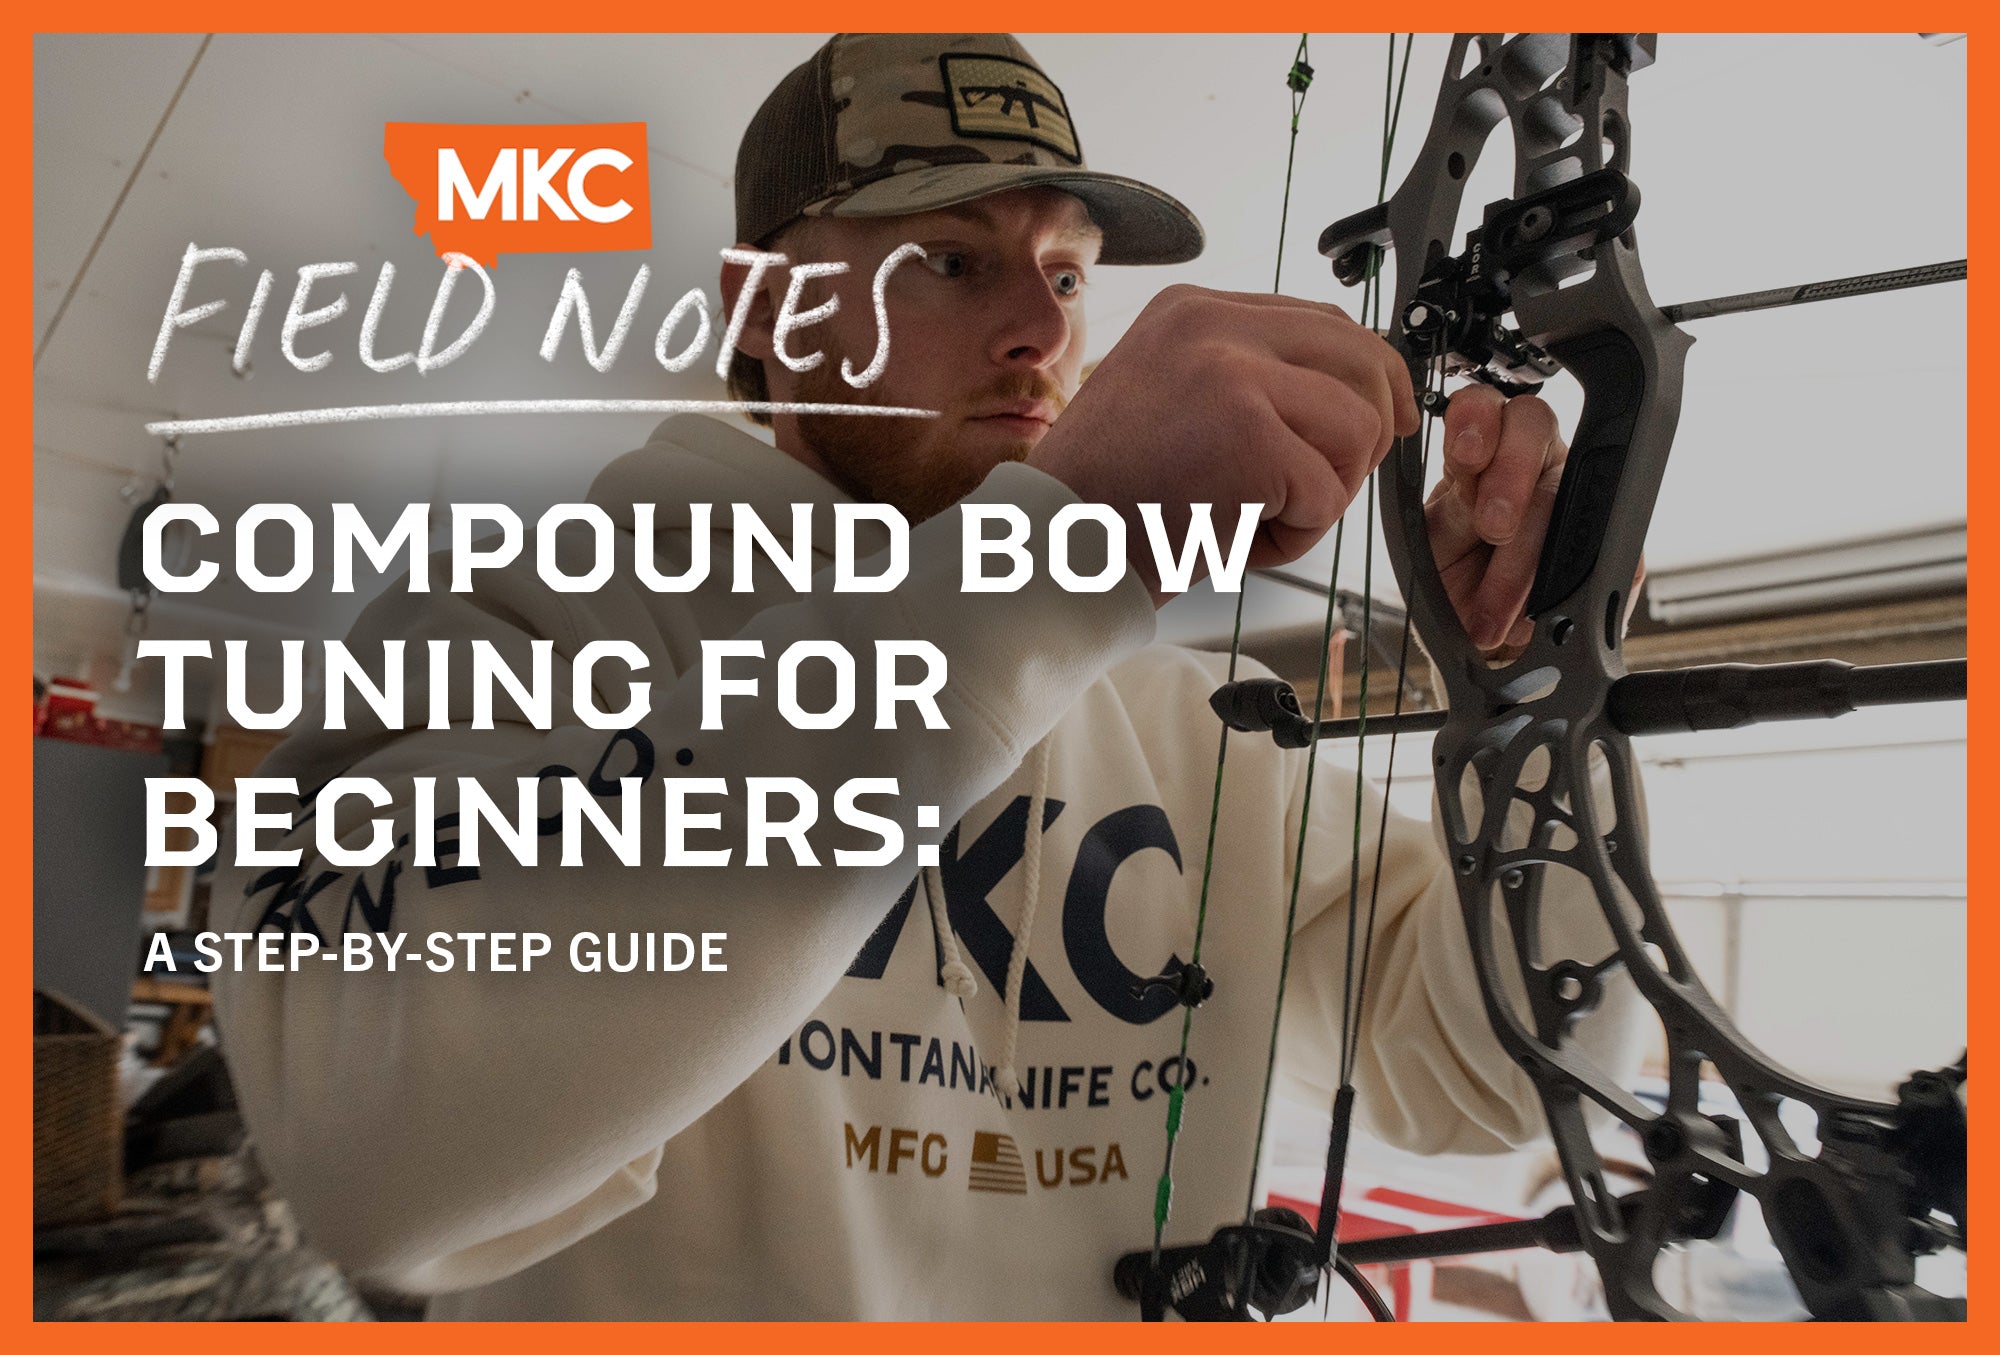 Brayden Cooney wears an MKC hoodie and camo hat as he demonstrates compound bow tuning for beginners.